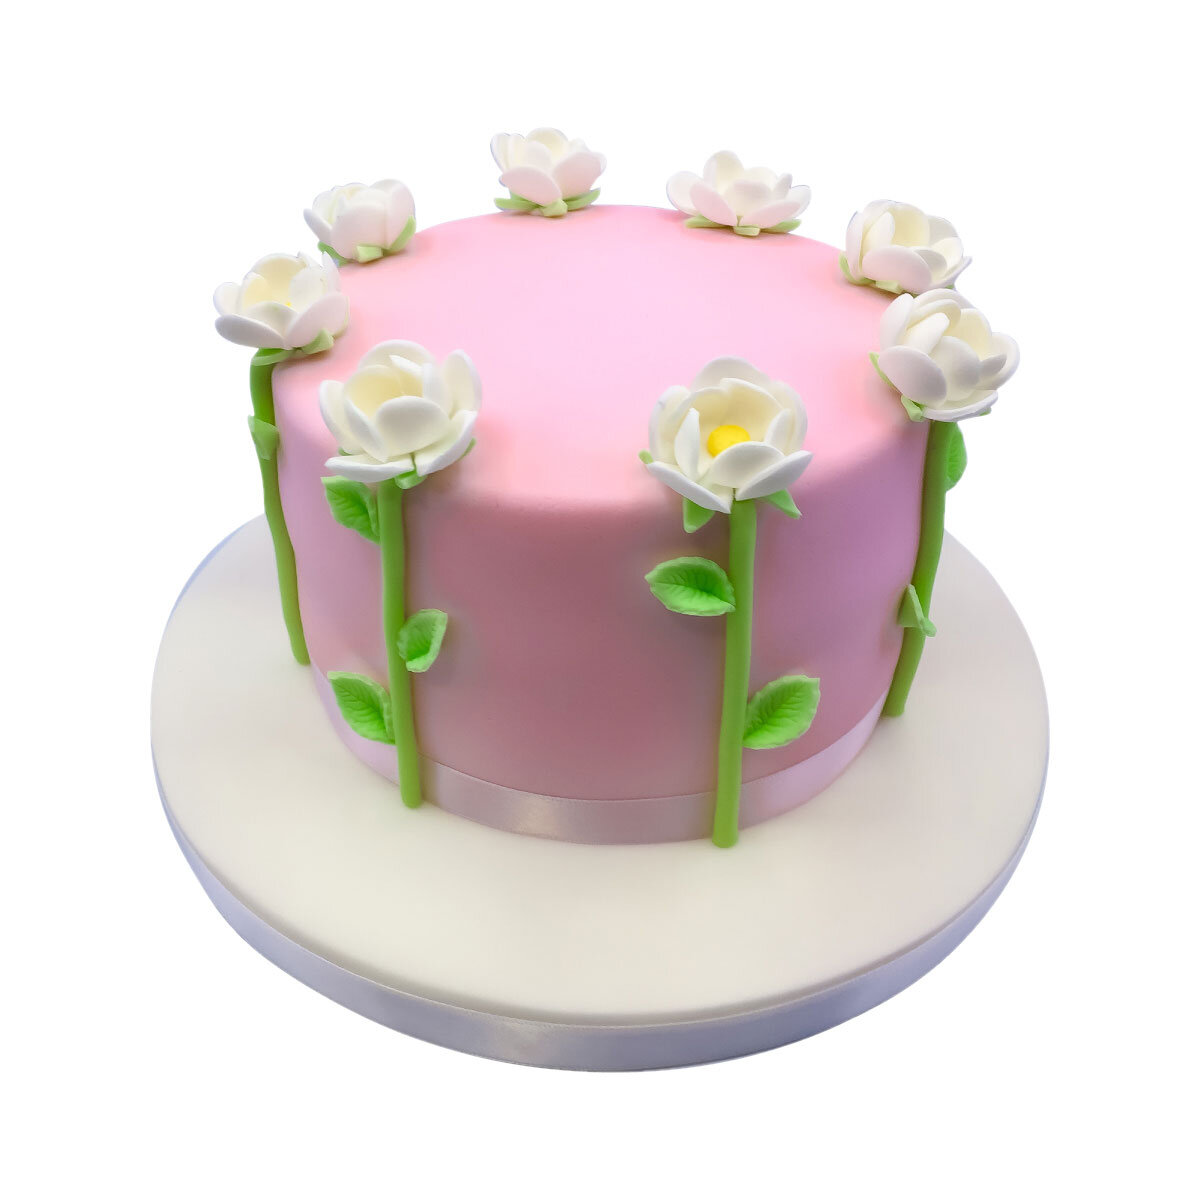 pink cake with white icing flowers and green stems